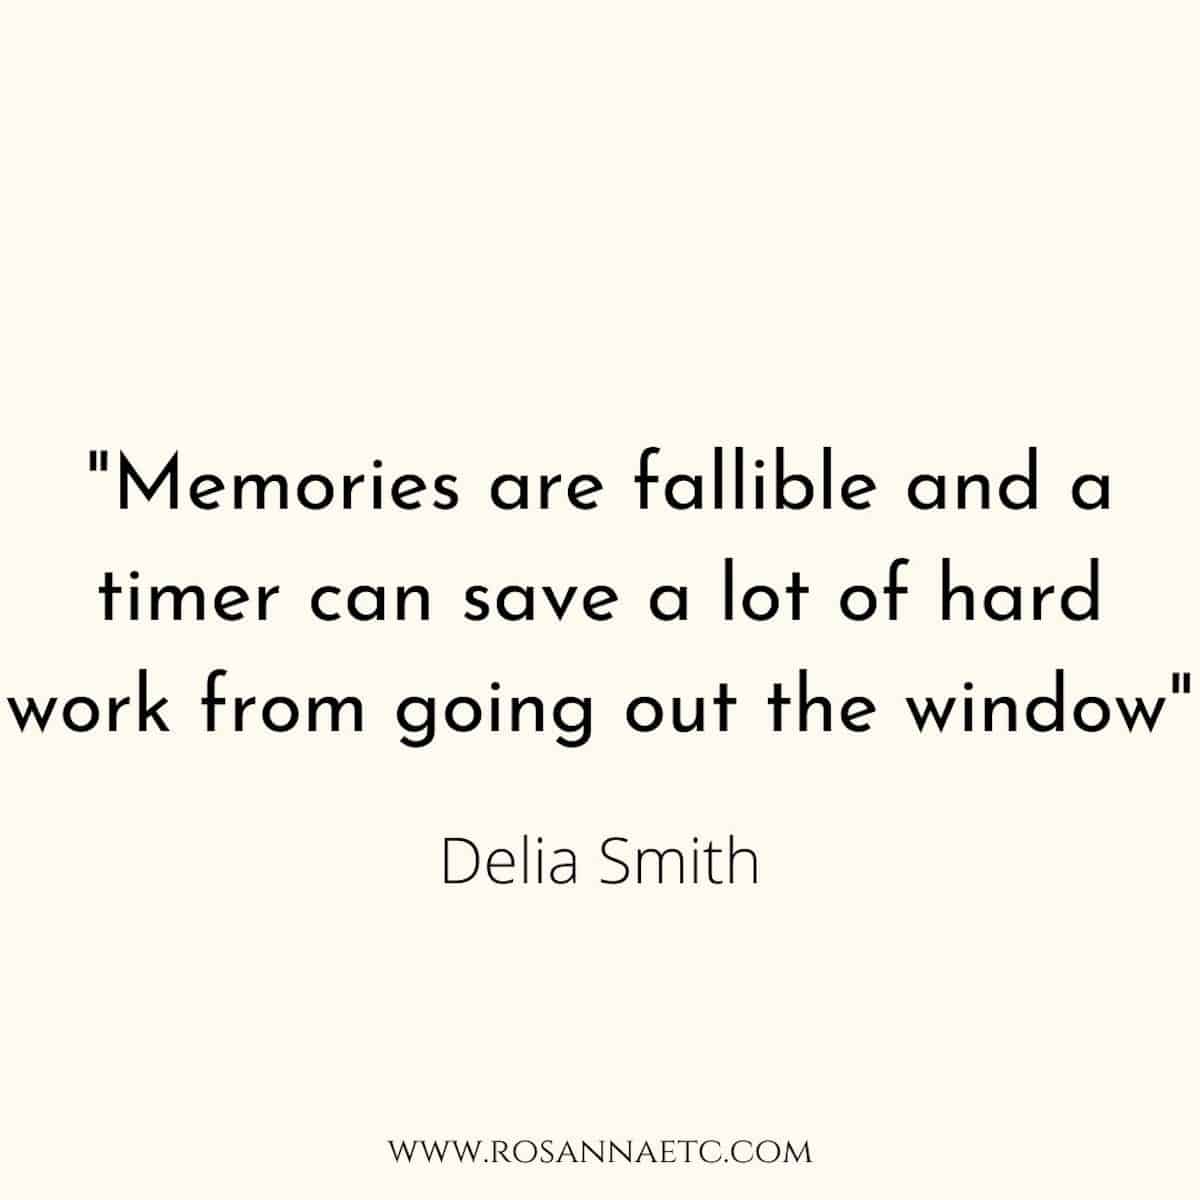 A quote from famous chef Delia Smith that reads "Memories are fallible and a timer can save a lot of hard work from going out the window".